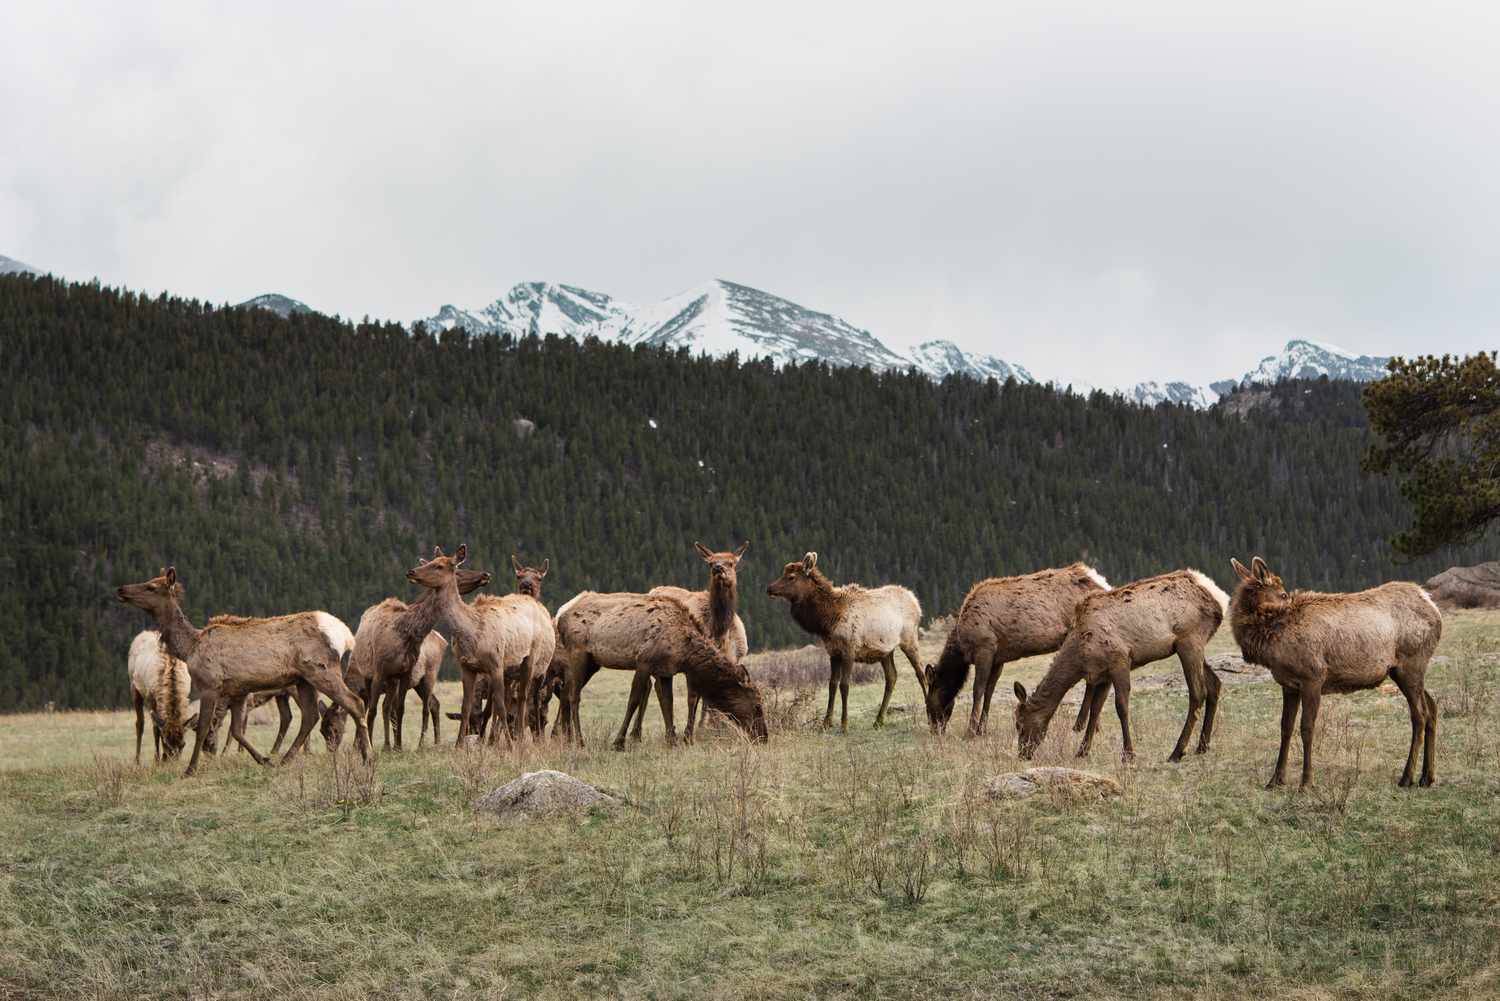 Elk standing and feeding in middle of open pasture in front of snowcapped mountain